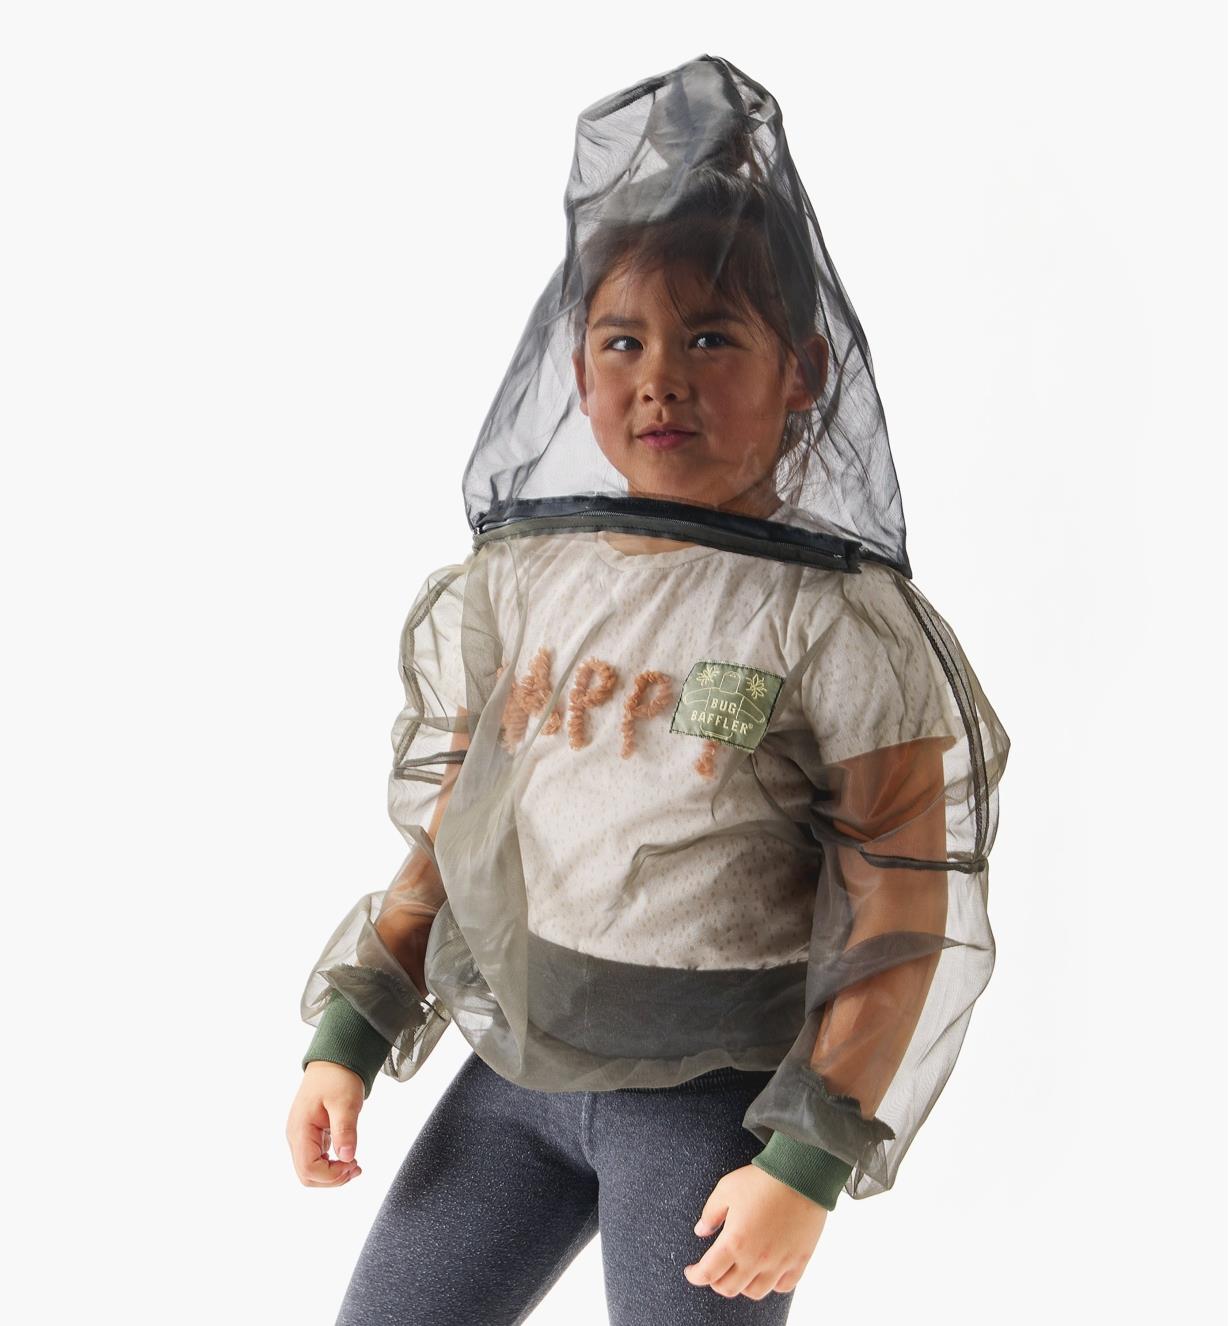 A child wears a hooded bug-protection shirt